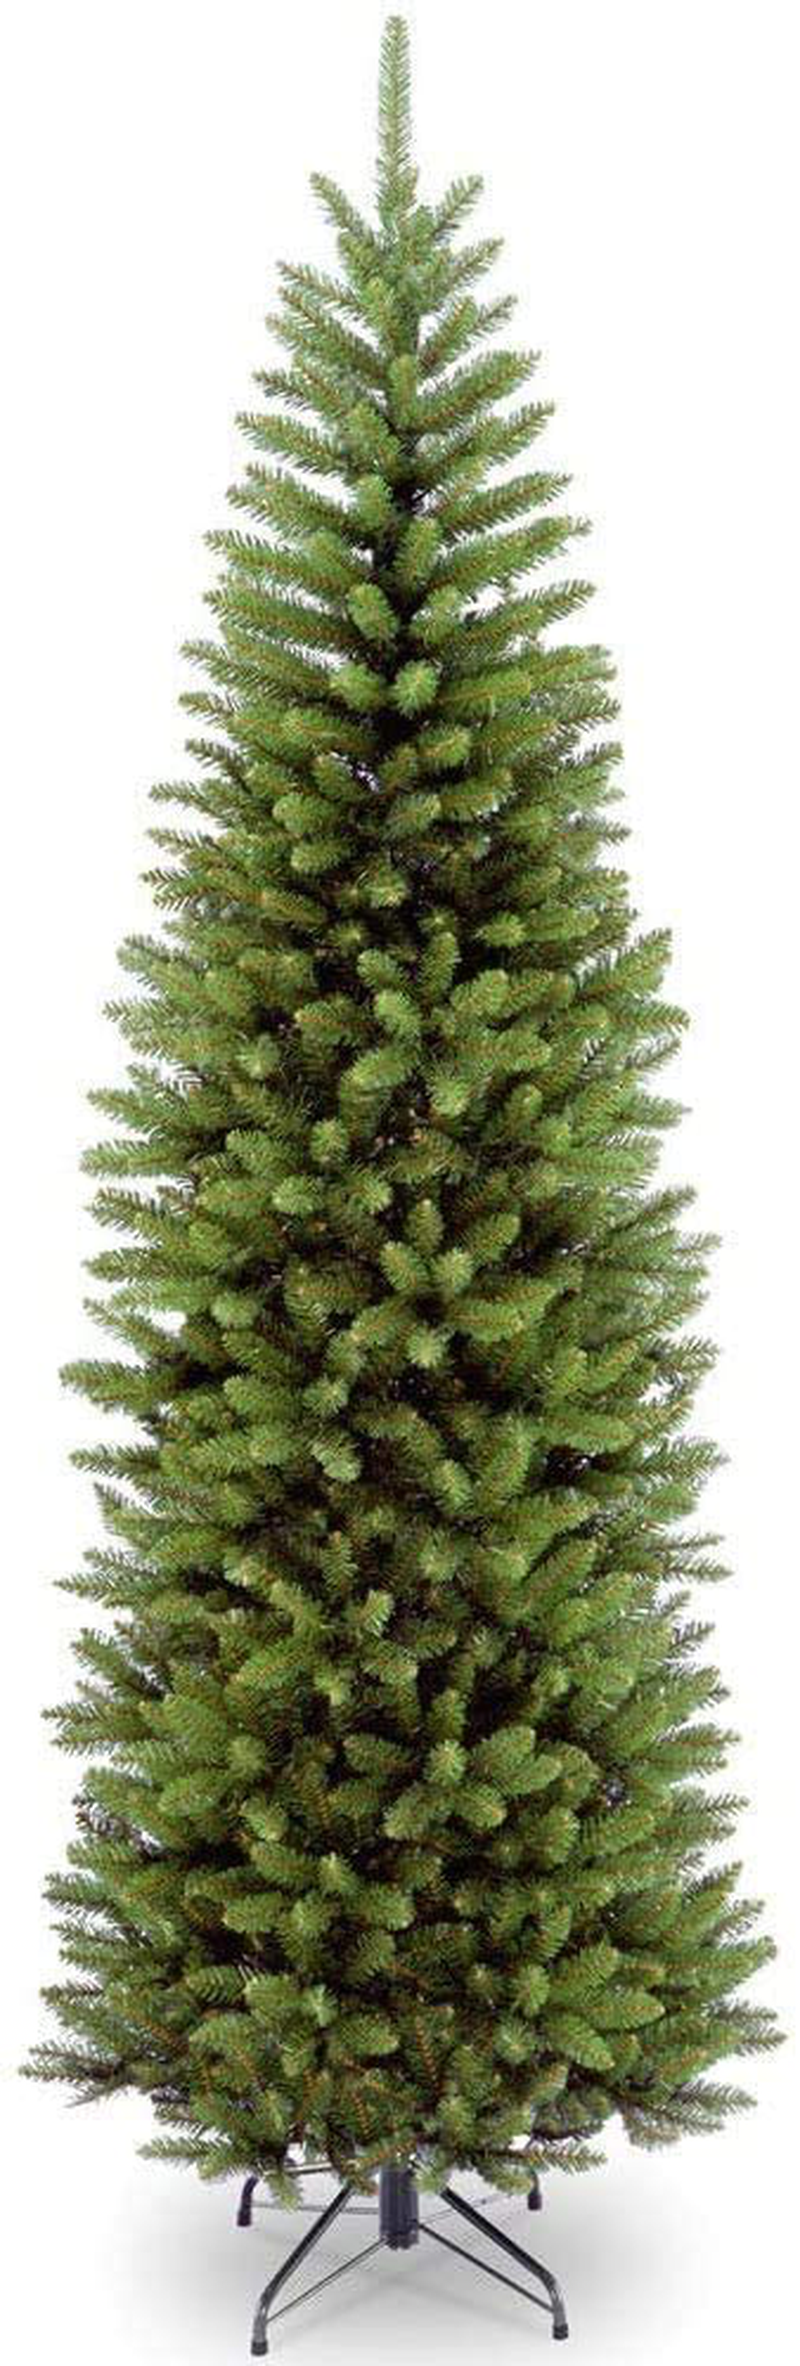 National Tree Company Artificial Christmas Tree Includes Stand, Kingswood Fir Slim - 7 ft, Green Home & Garden > Decor > Seasonal & Holiday Decorations > Christmas Tree Stands National Tree Kingswood Fir Slim - 6.5 ft  